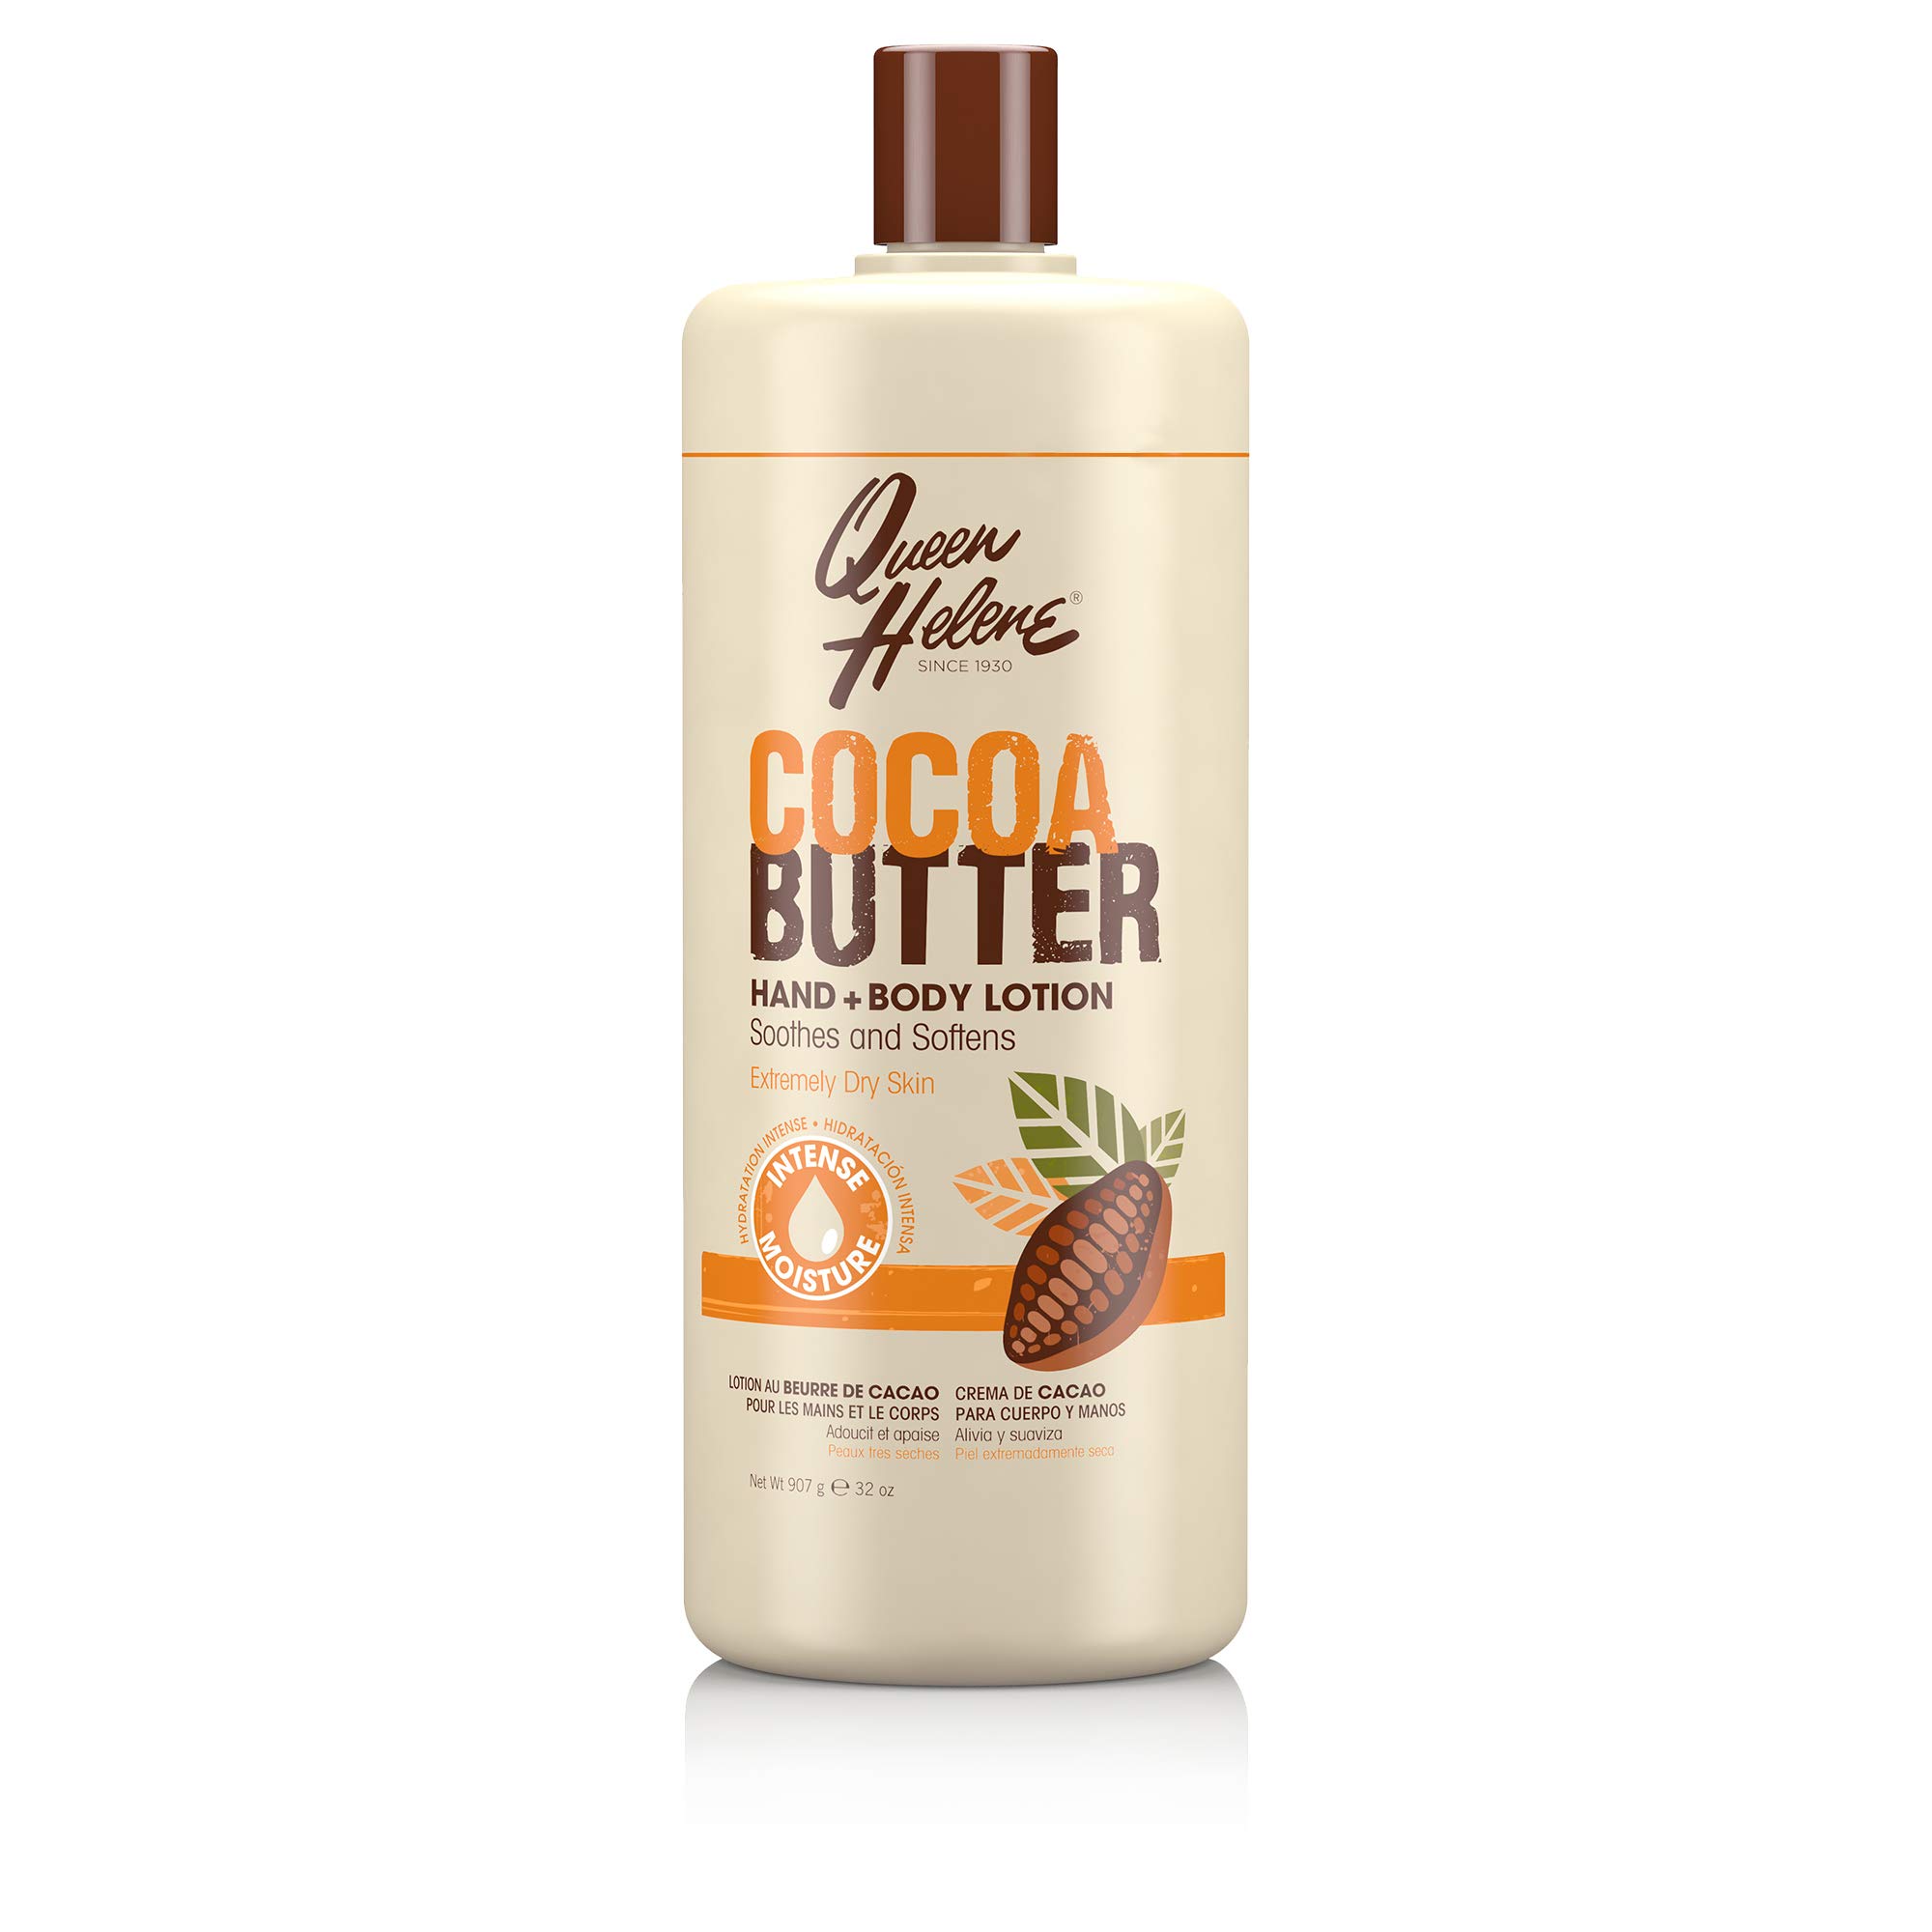 QUEEN HELENE COCOA BUTTER HAND AND BODY LOTION 907G